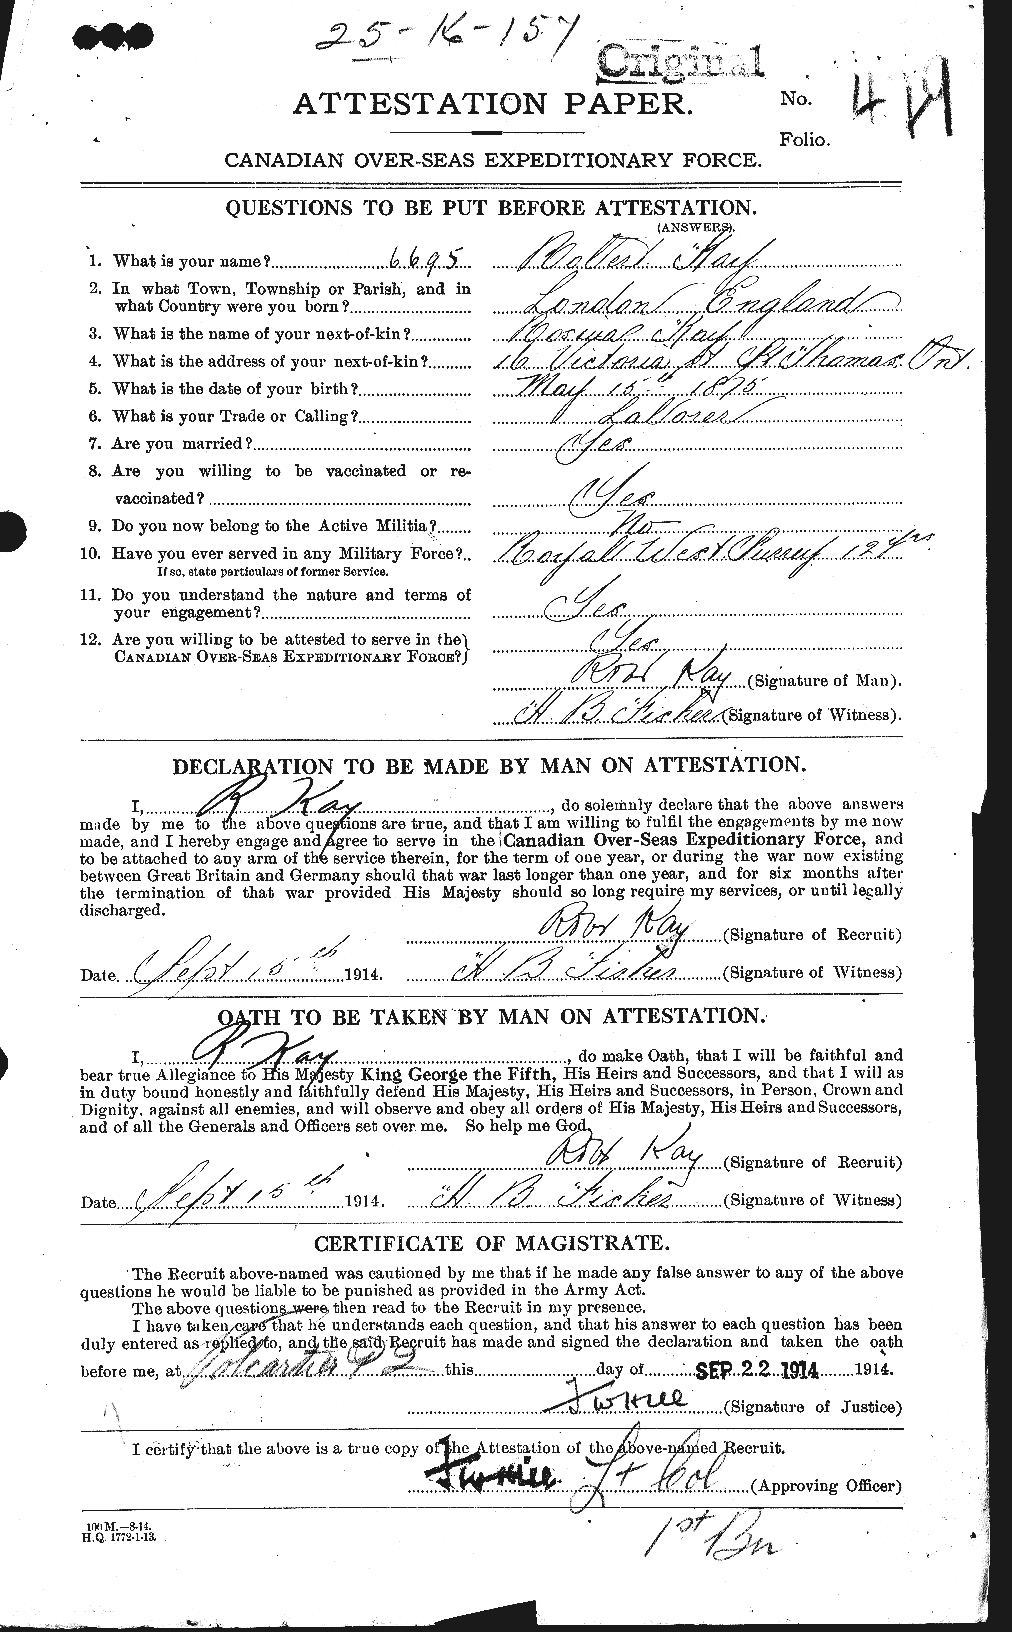 Personnel Records of the First World War - CEF 427774a